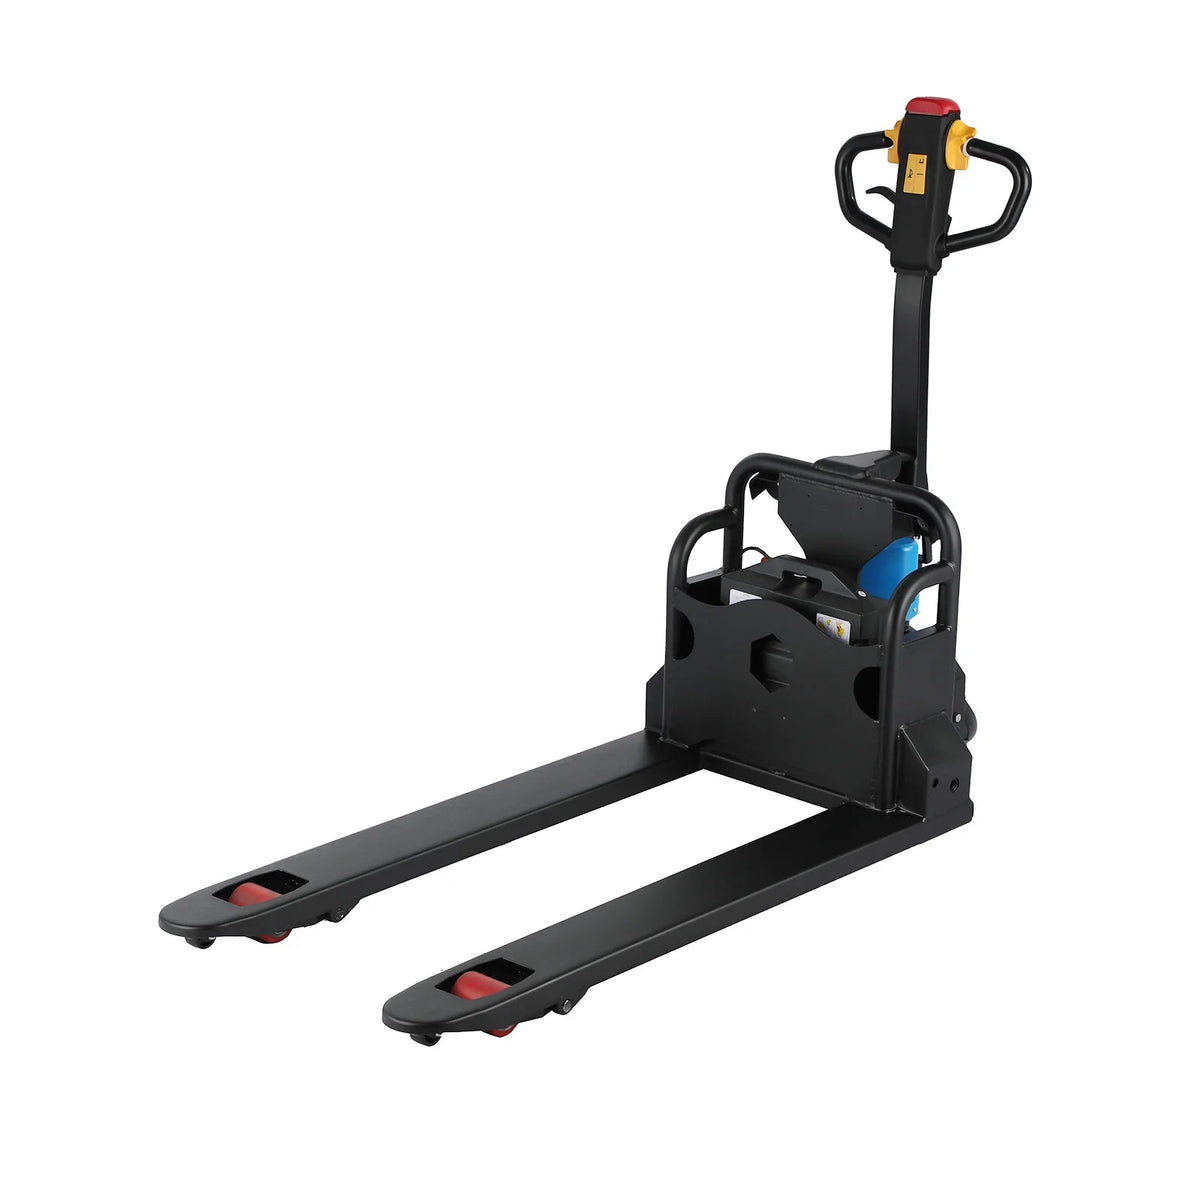 Apollolift A-1021 Battery Powered Pallet Truck 3300 lbs Capacity 45" x 21" New